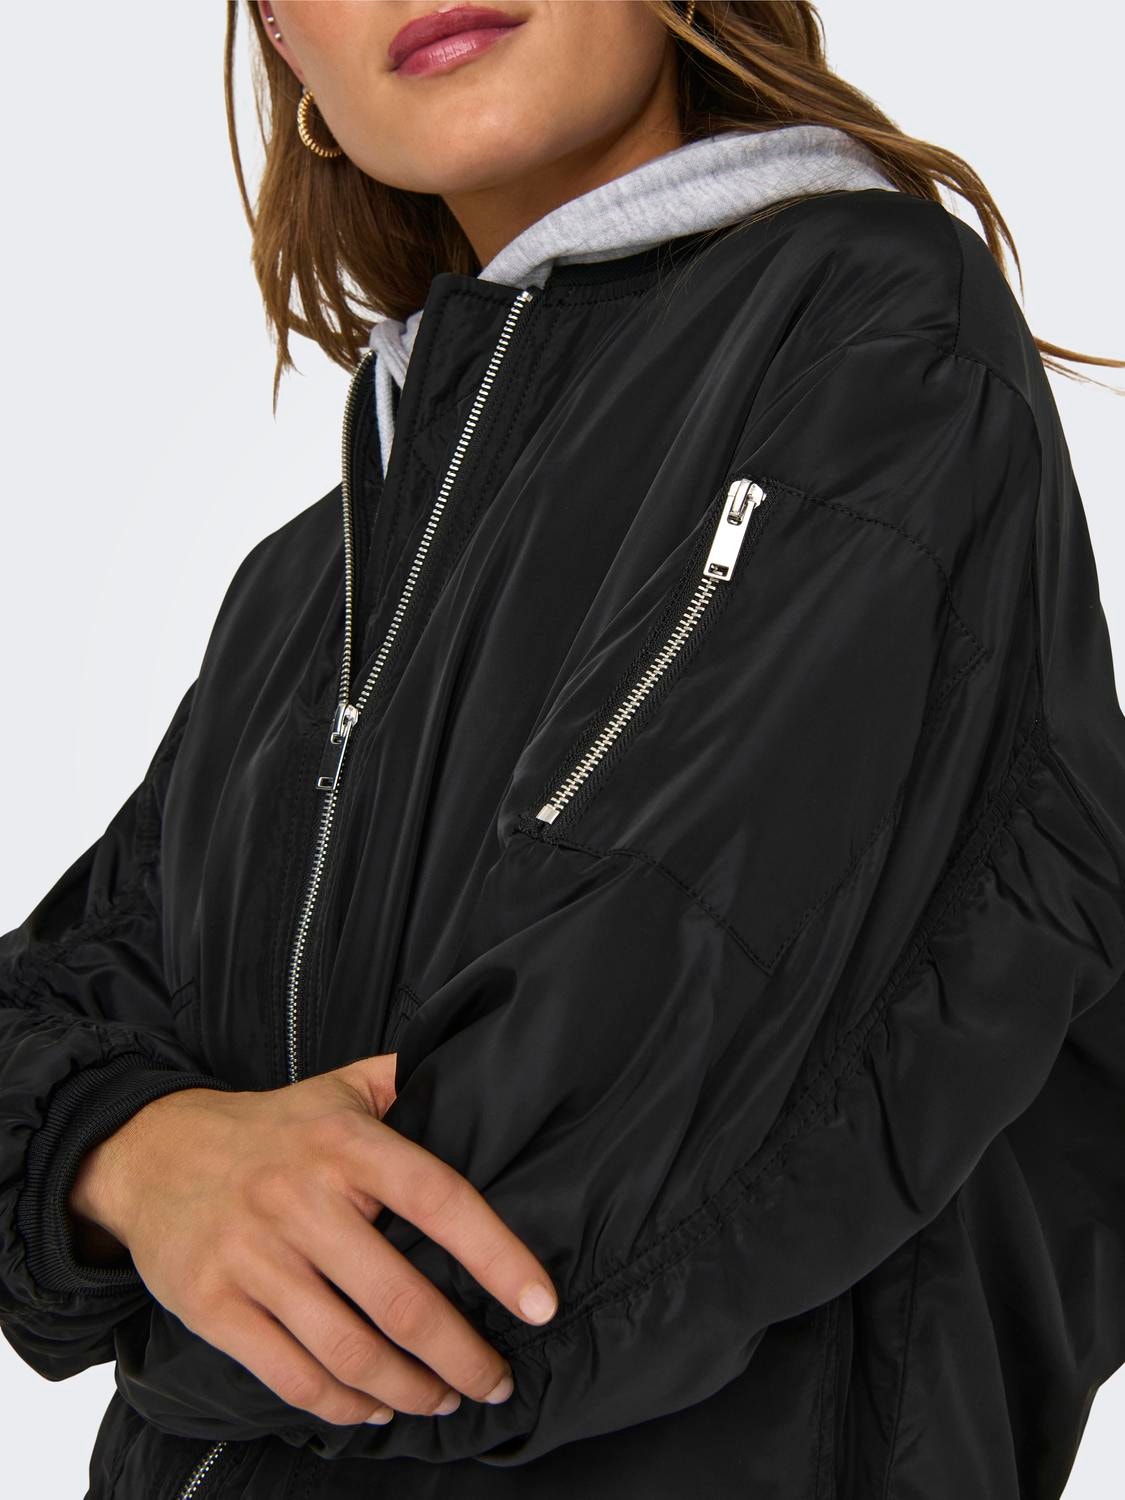  IHGFTRTH Womens Jacket Oversized Loose,invite only